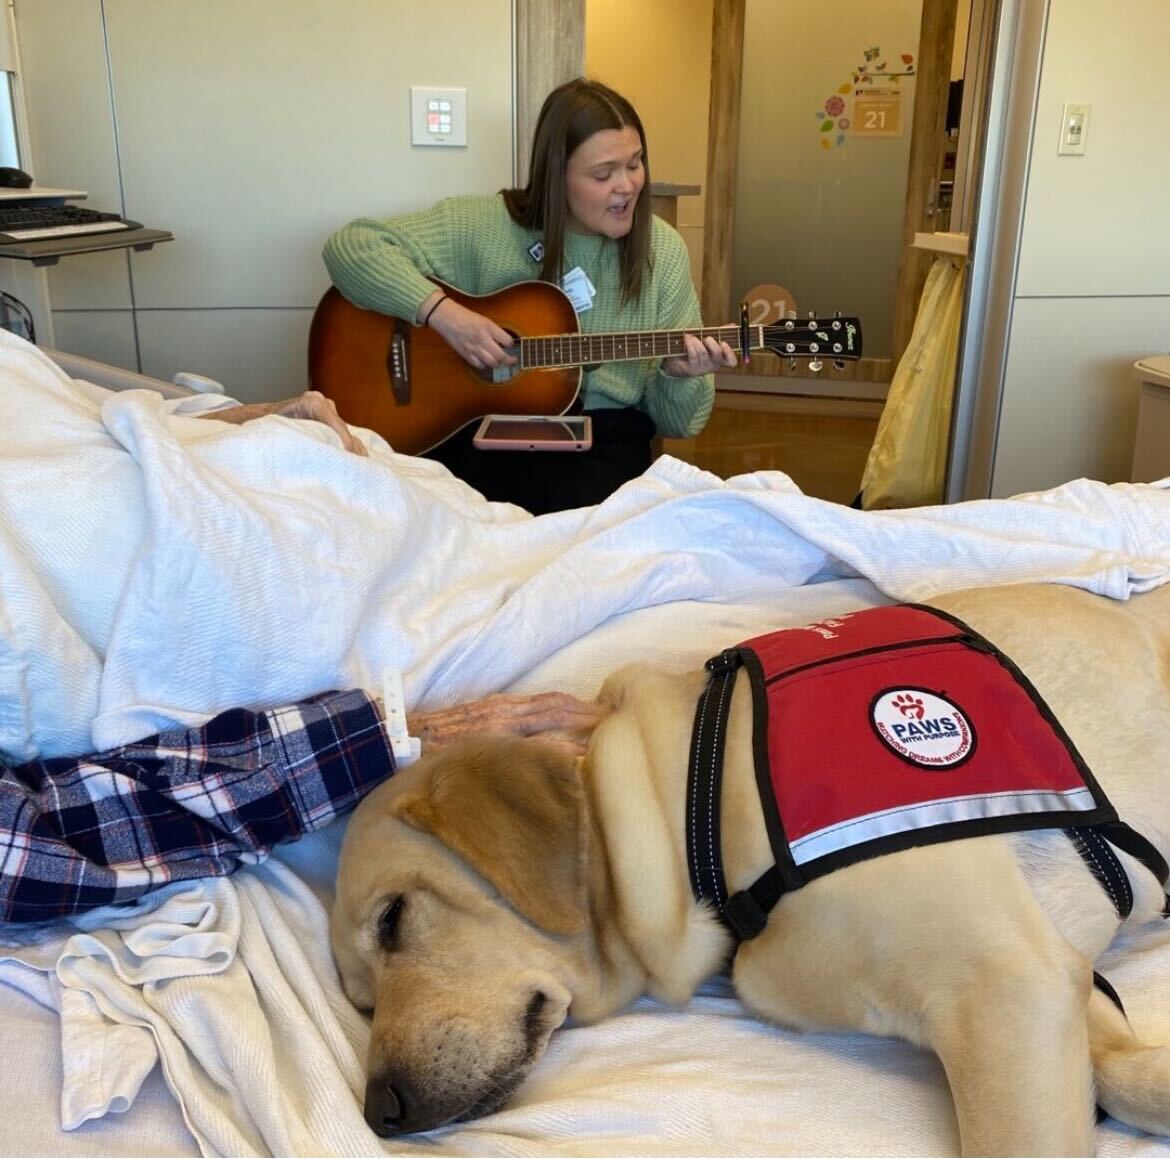 Bringing harmony to healing! 🎶🐾 Facility dog, Zeus and music therapist, Kennedy McCollam teamed up to offer comfort and support to this patient at Norton Cancer Institute. Together, they're wagging tails and lifting spirits, one beat at a time!